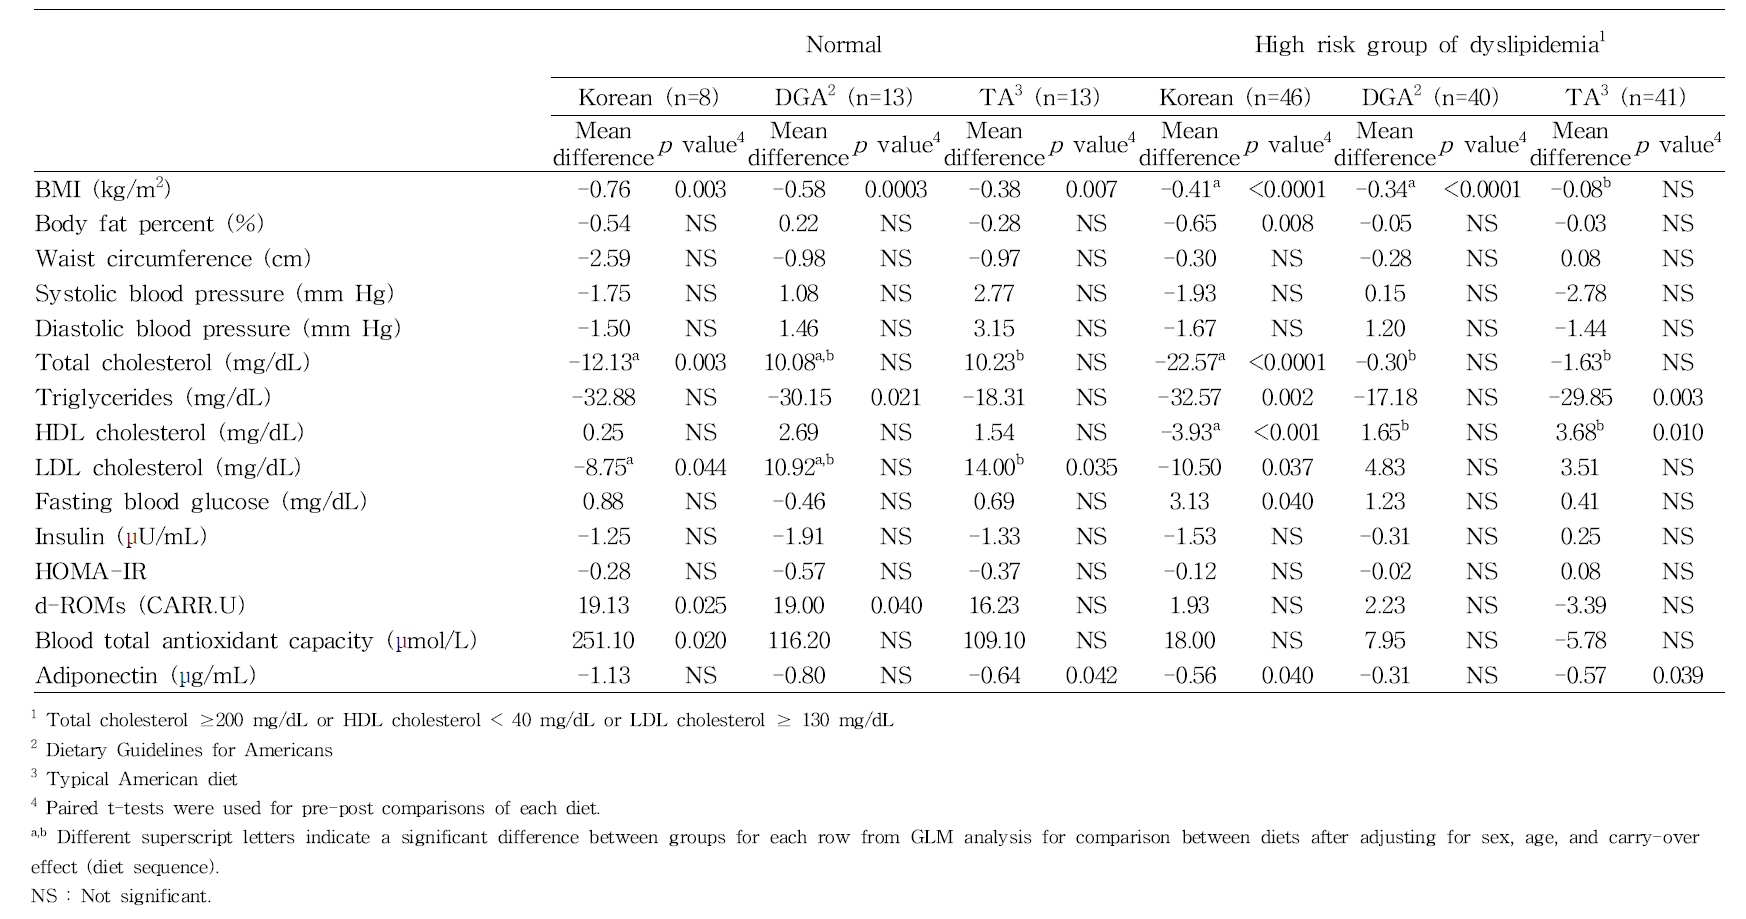 Changes in anthropometric and biochemical parameters by risk of dyslipidemia at baseline according to experimental diet